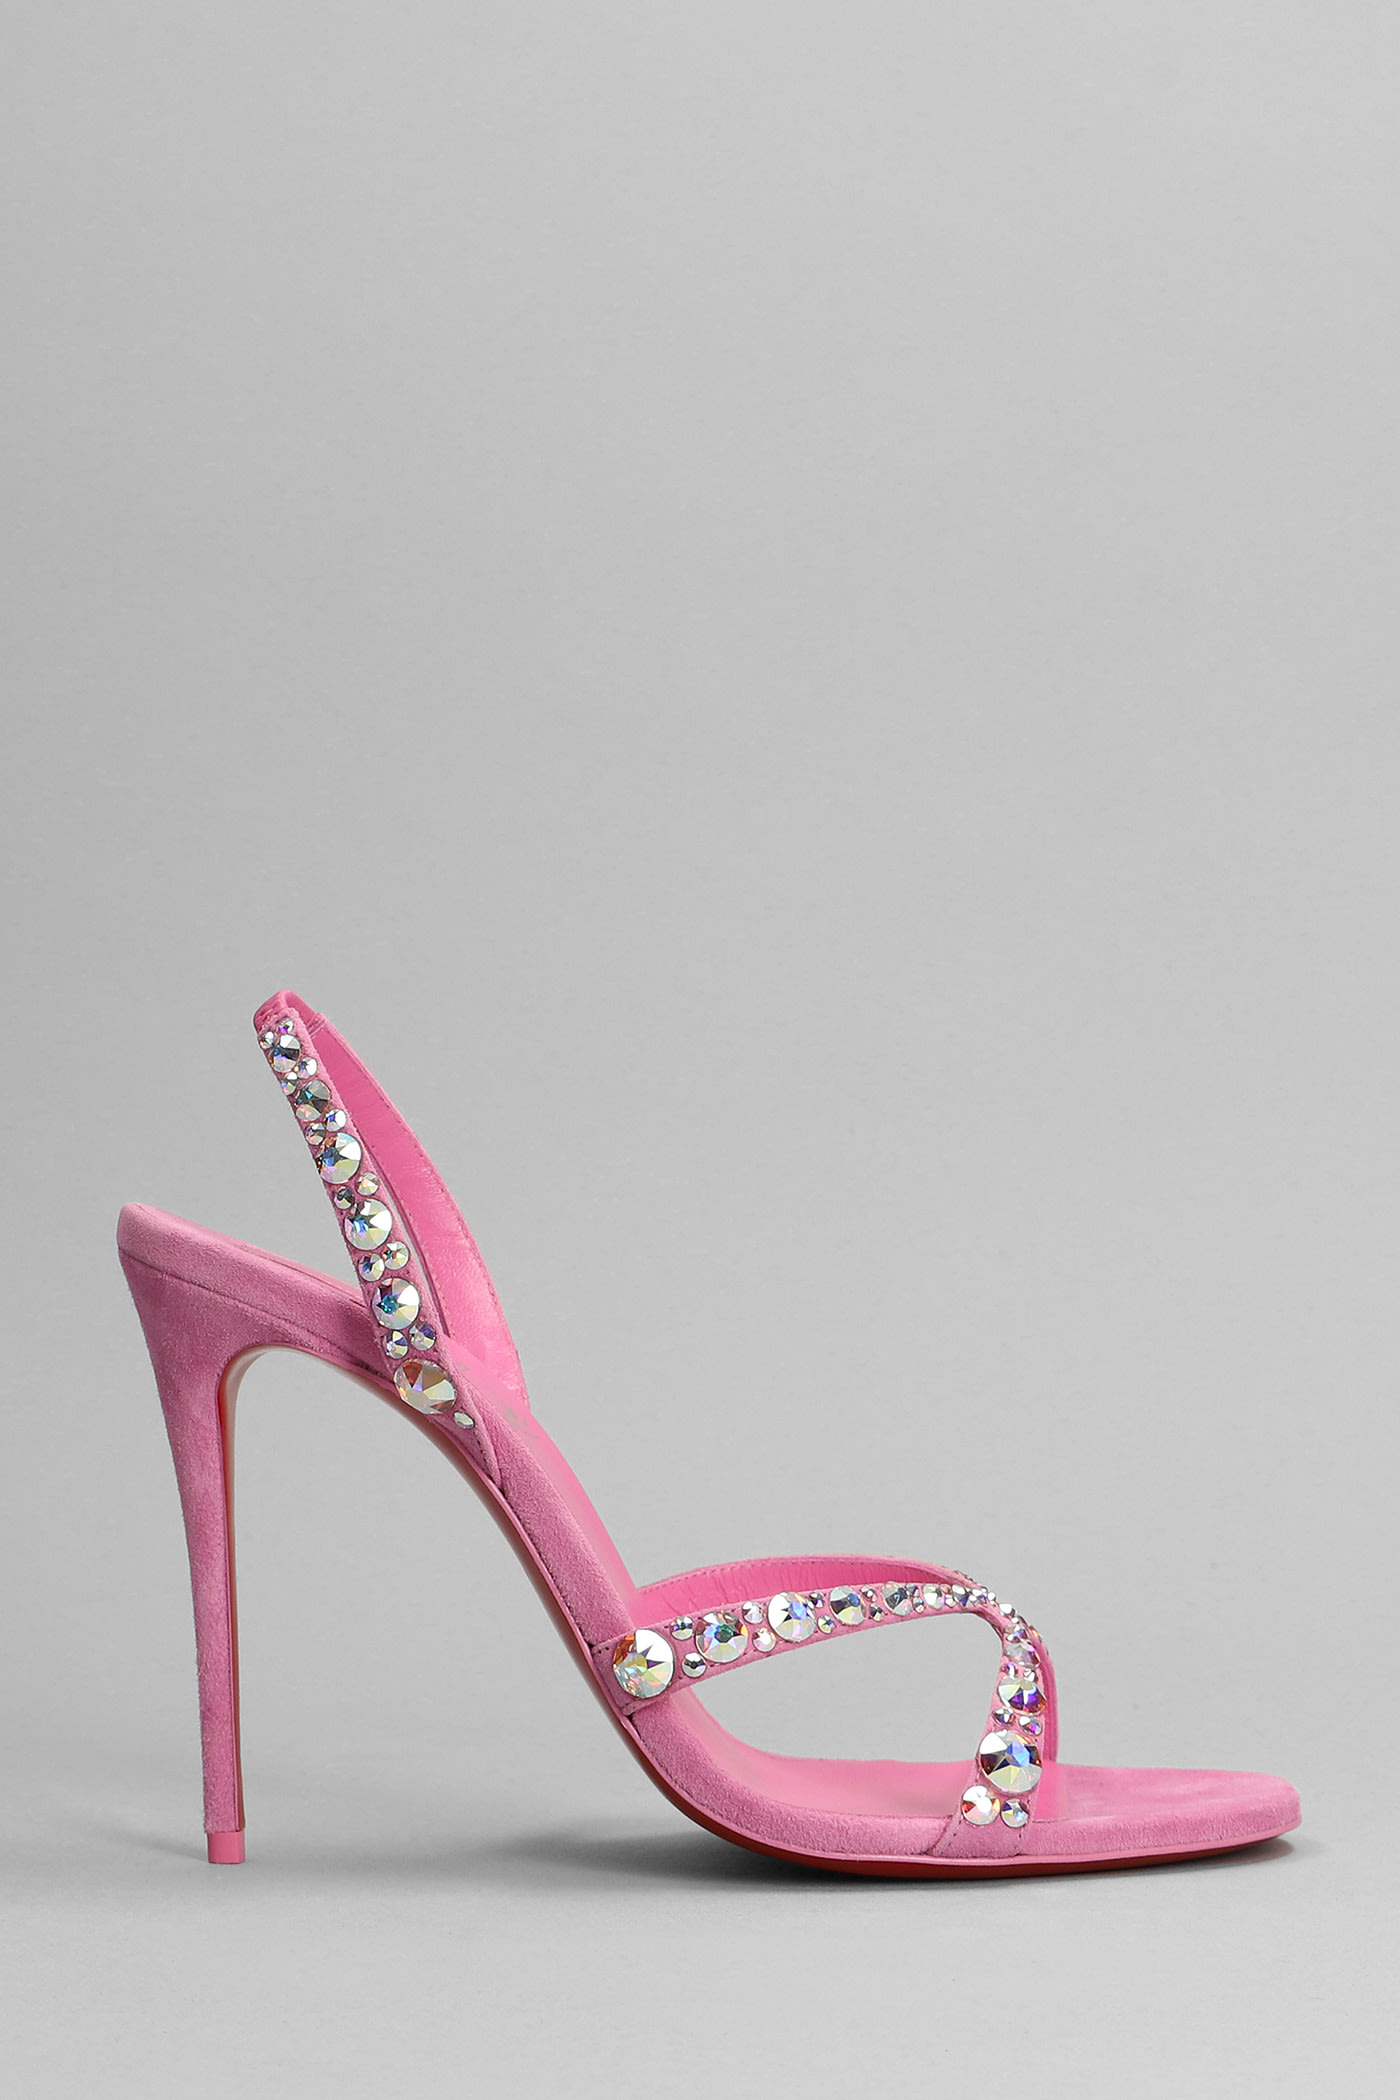 CHRISTIAN LOUBOUTIN EMILIE 100 SANDALS IN ROSE-PINK SUEDE